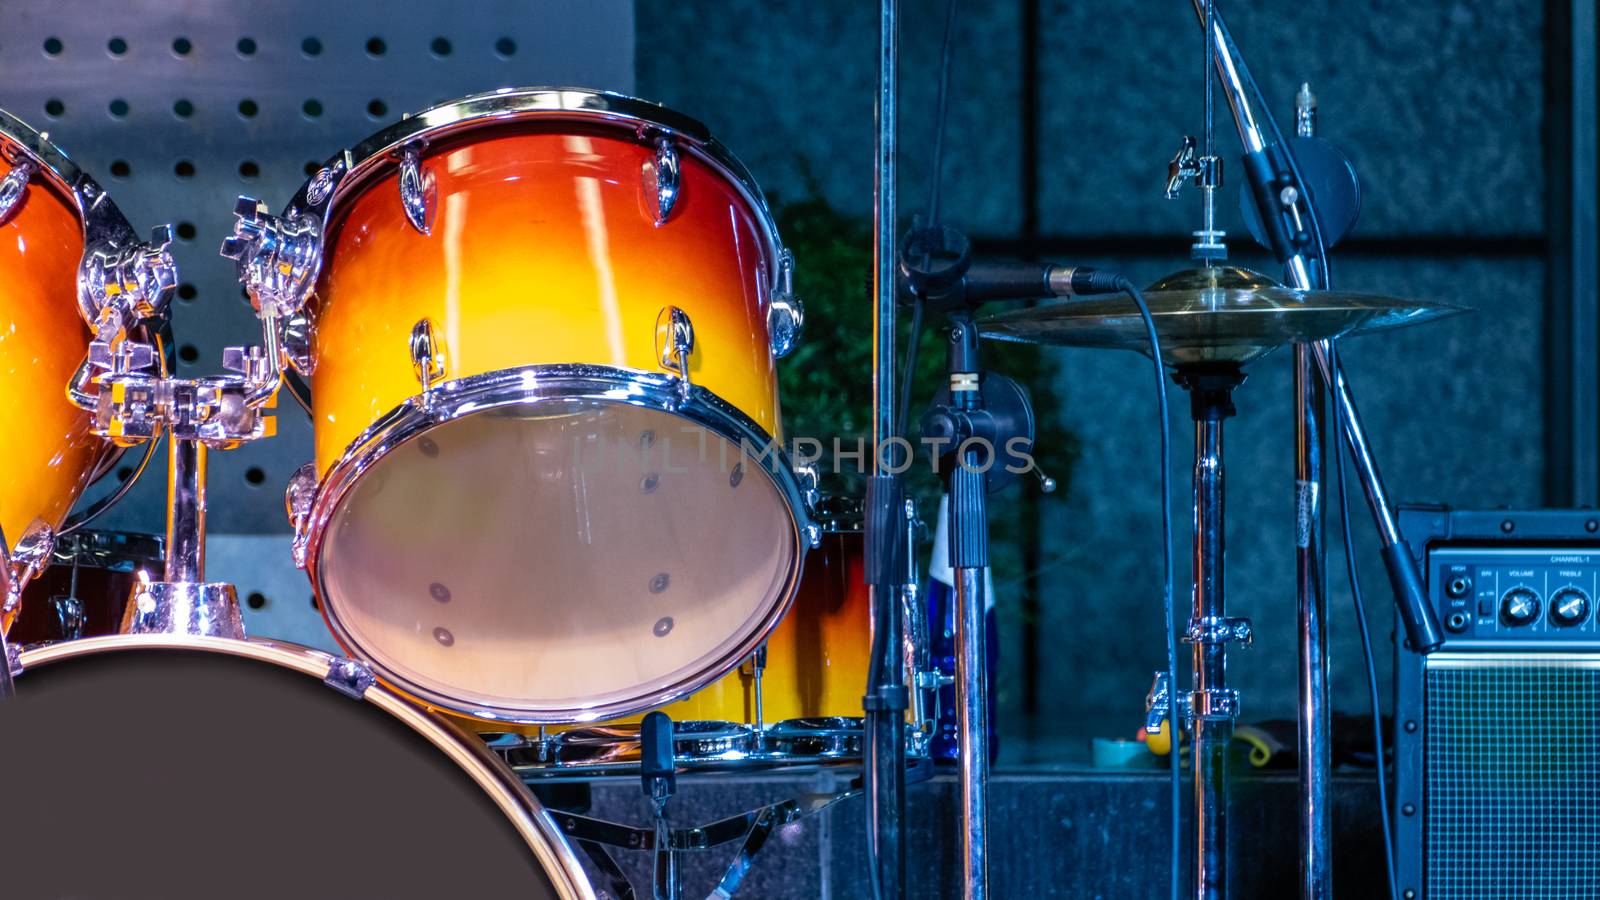 Close-up of colorful drums on stage by imagesbykenny